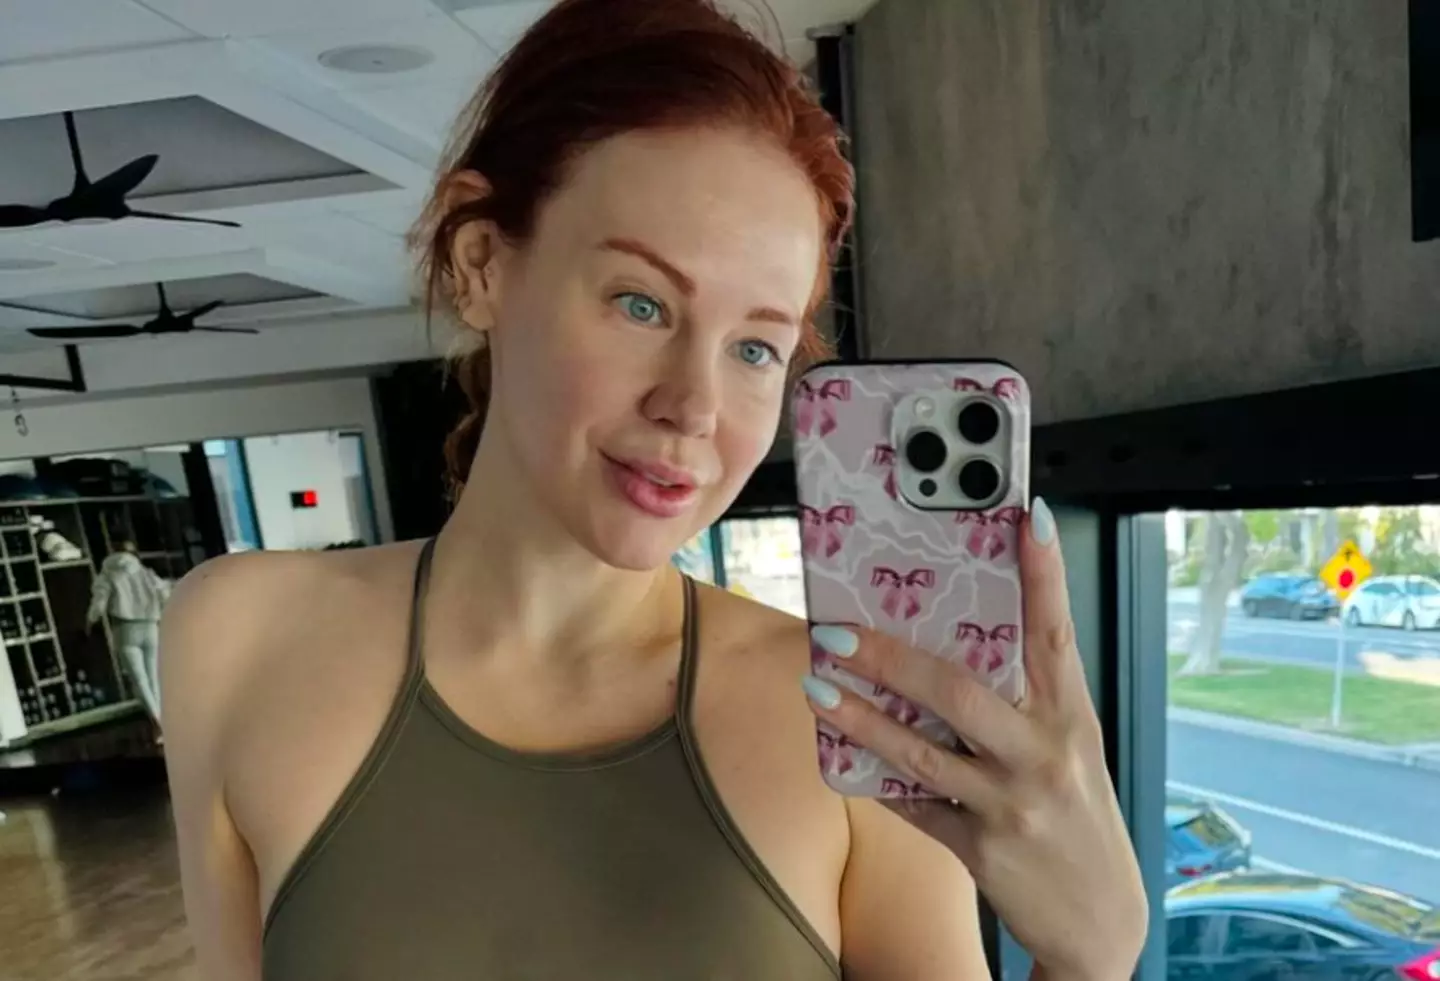 She has revealed a clause in her contract that keeps her covered. (Instagram/@maitlandward)